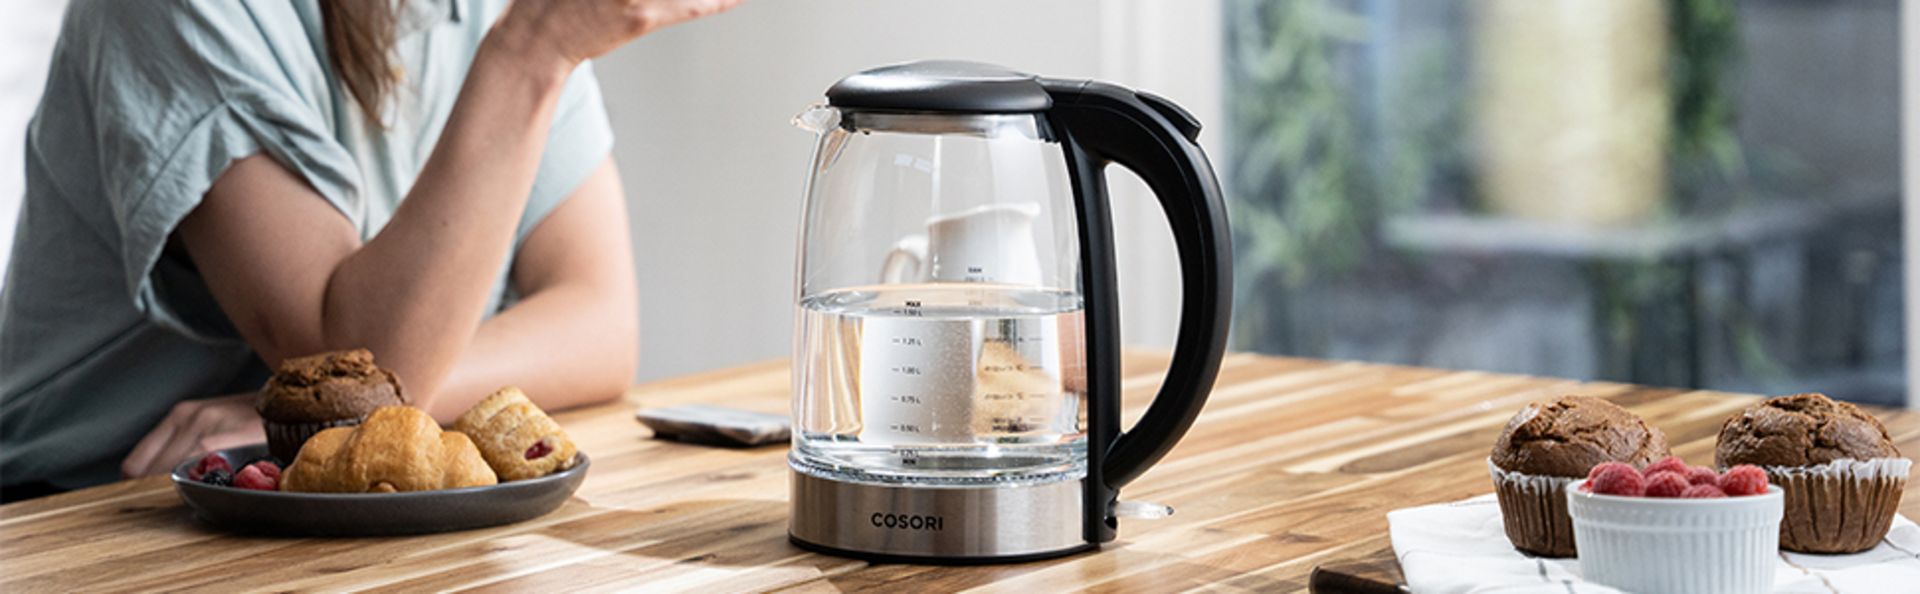 RRP-£23 COSORI Electric Glass Kettle 1.5L with Blue LED, 3000W for Fast and Quiet Boil, Stainless St